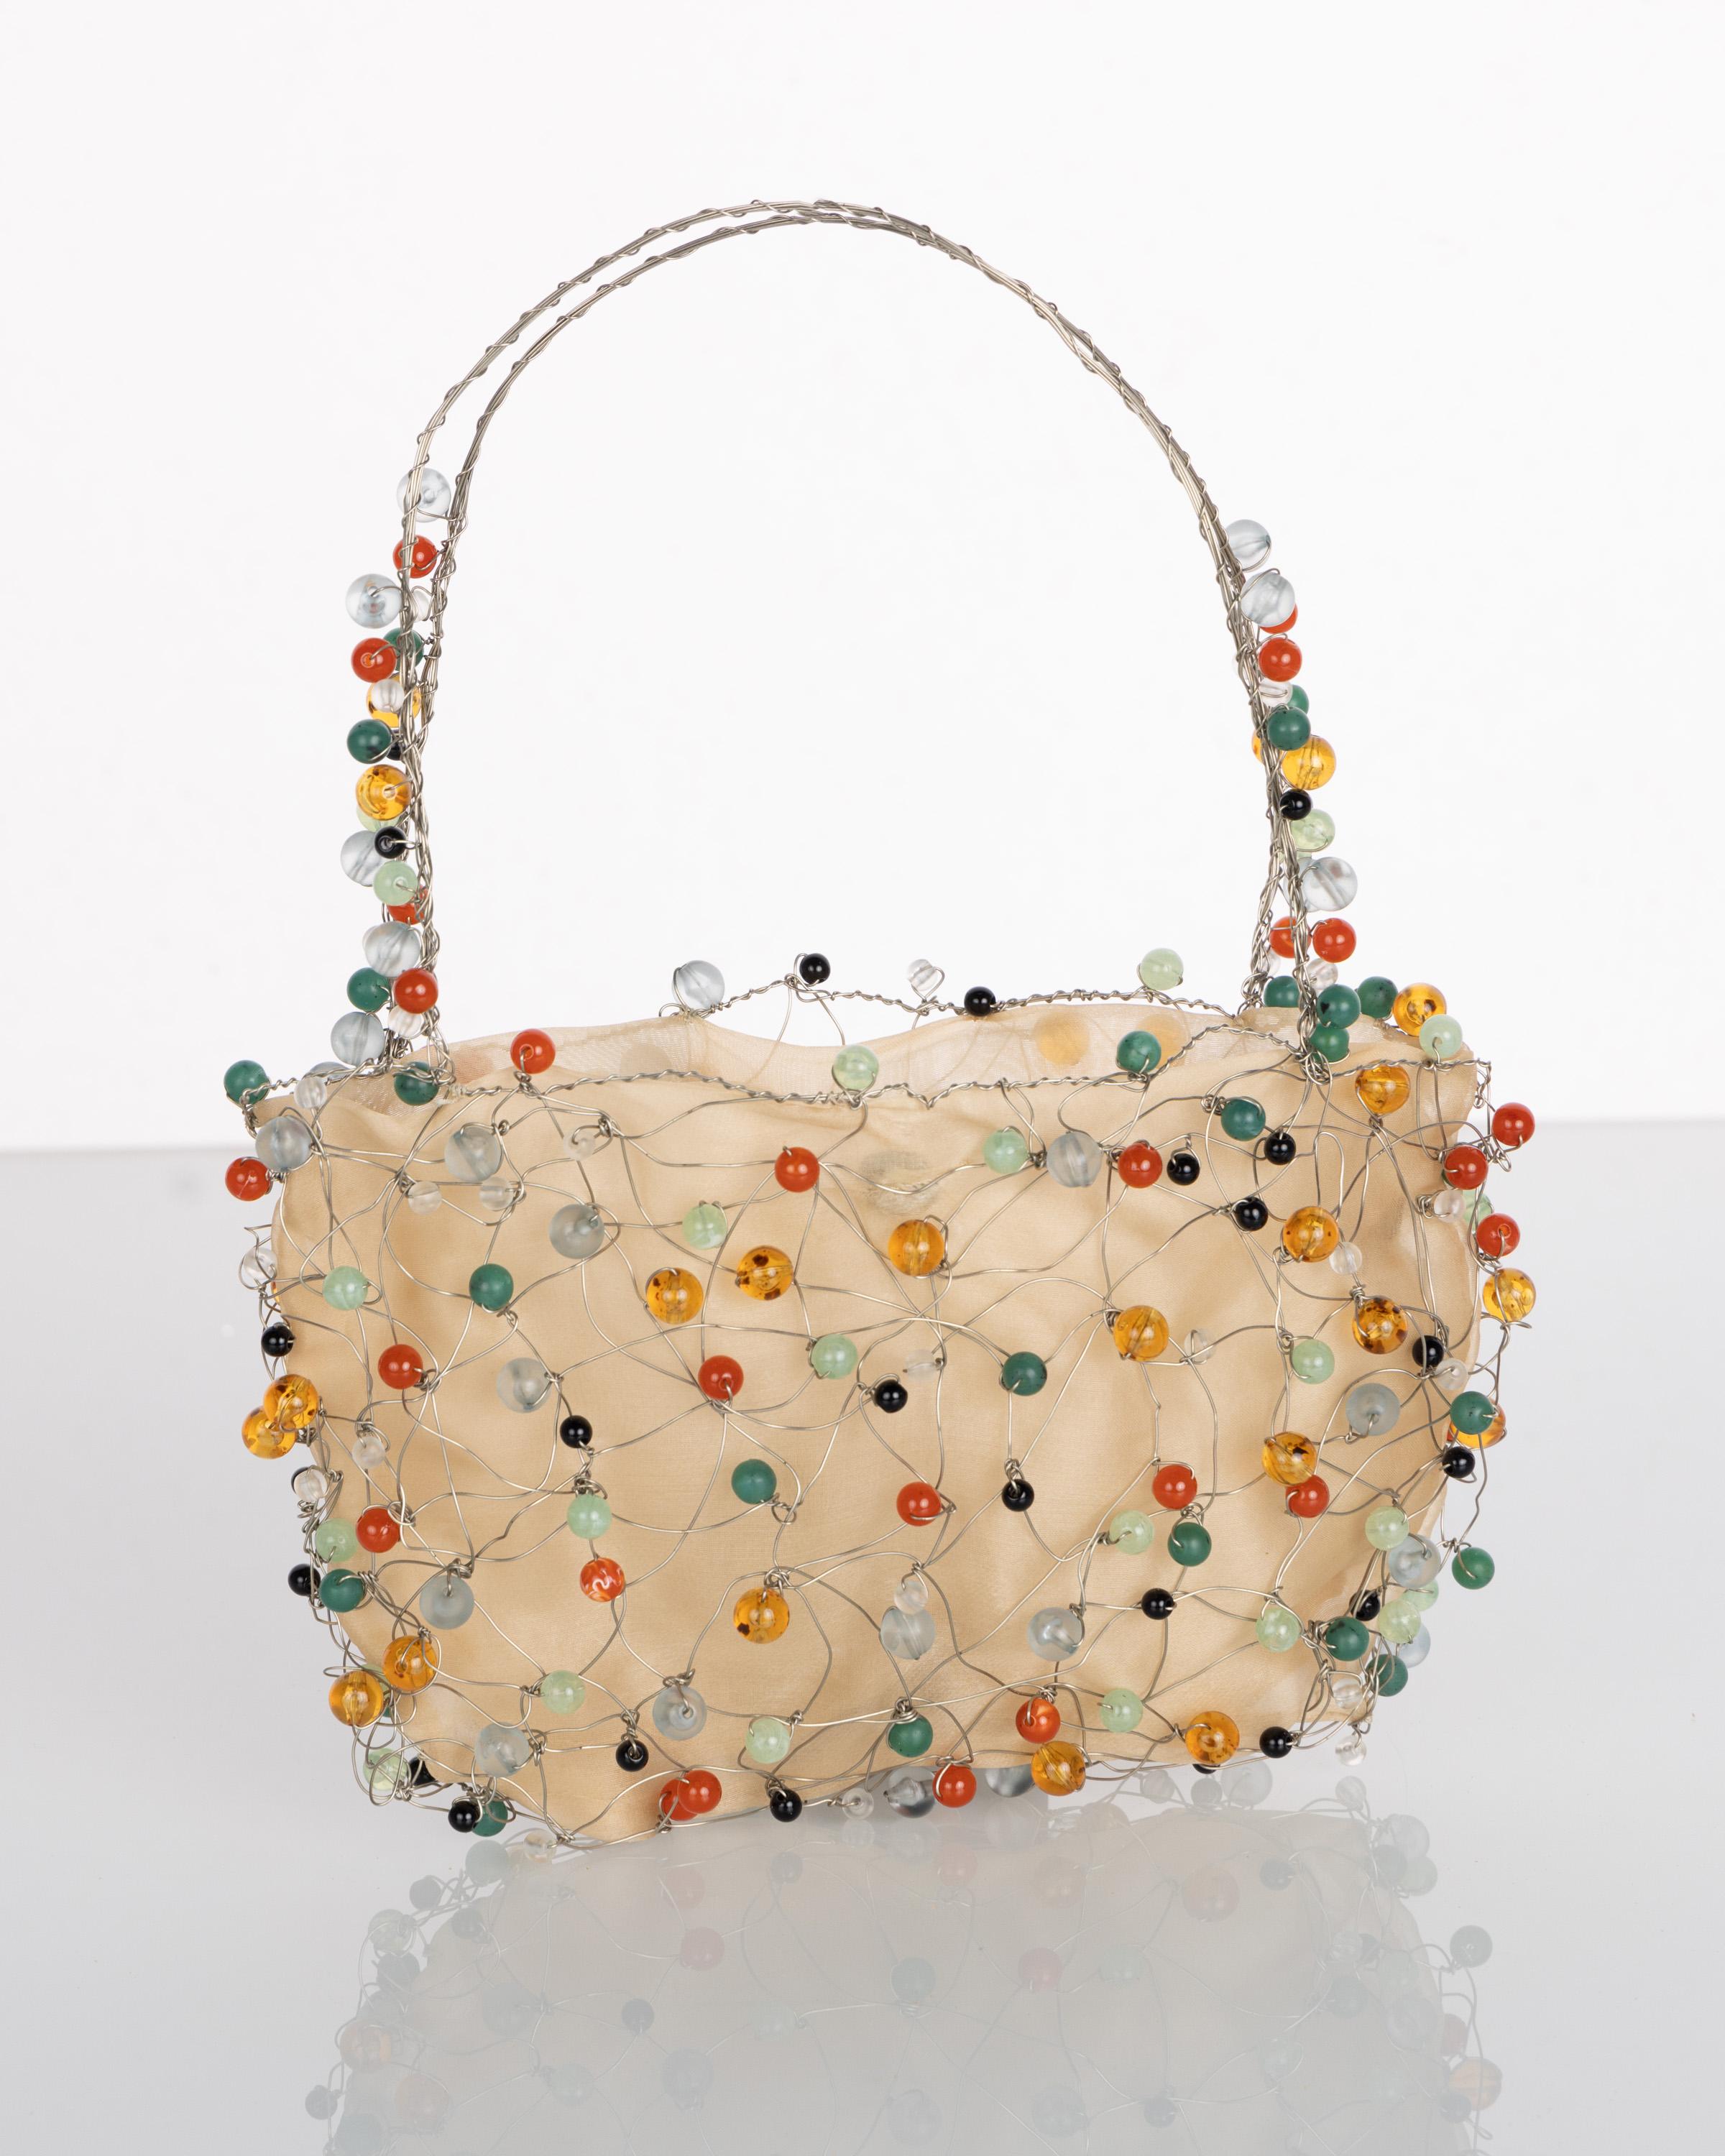 Beaded handbags were all the rage for much of the 19th century. Called reticules, these small bags would carry only the barest of necessities and tended to be more of a decorative accessory than functional. This version by Bottega Veneta